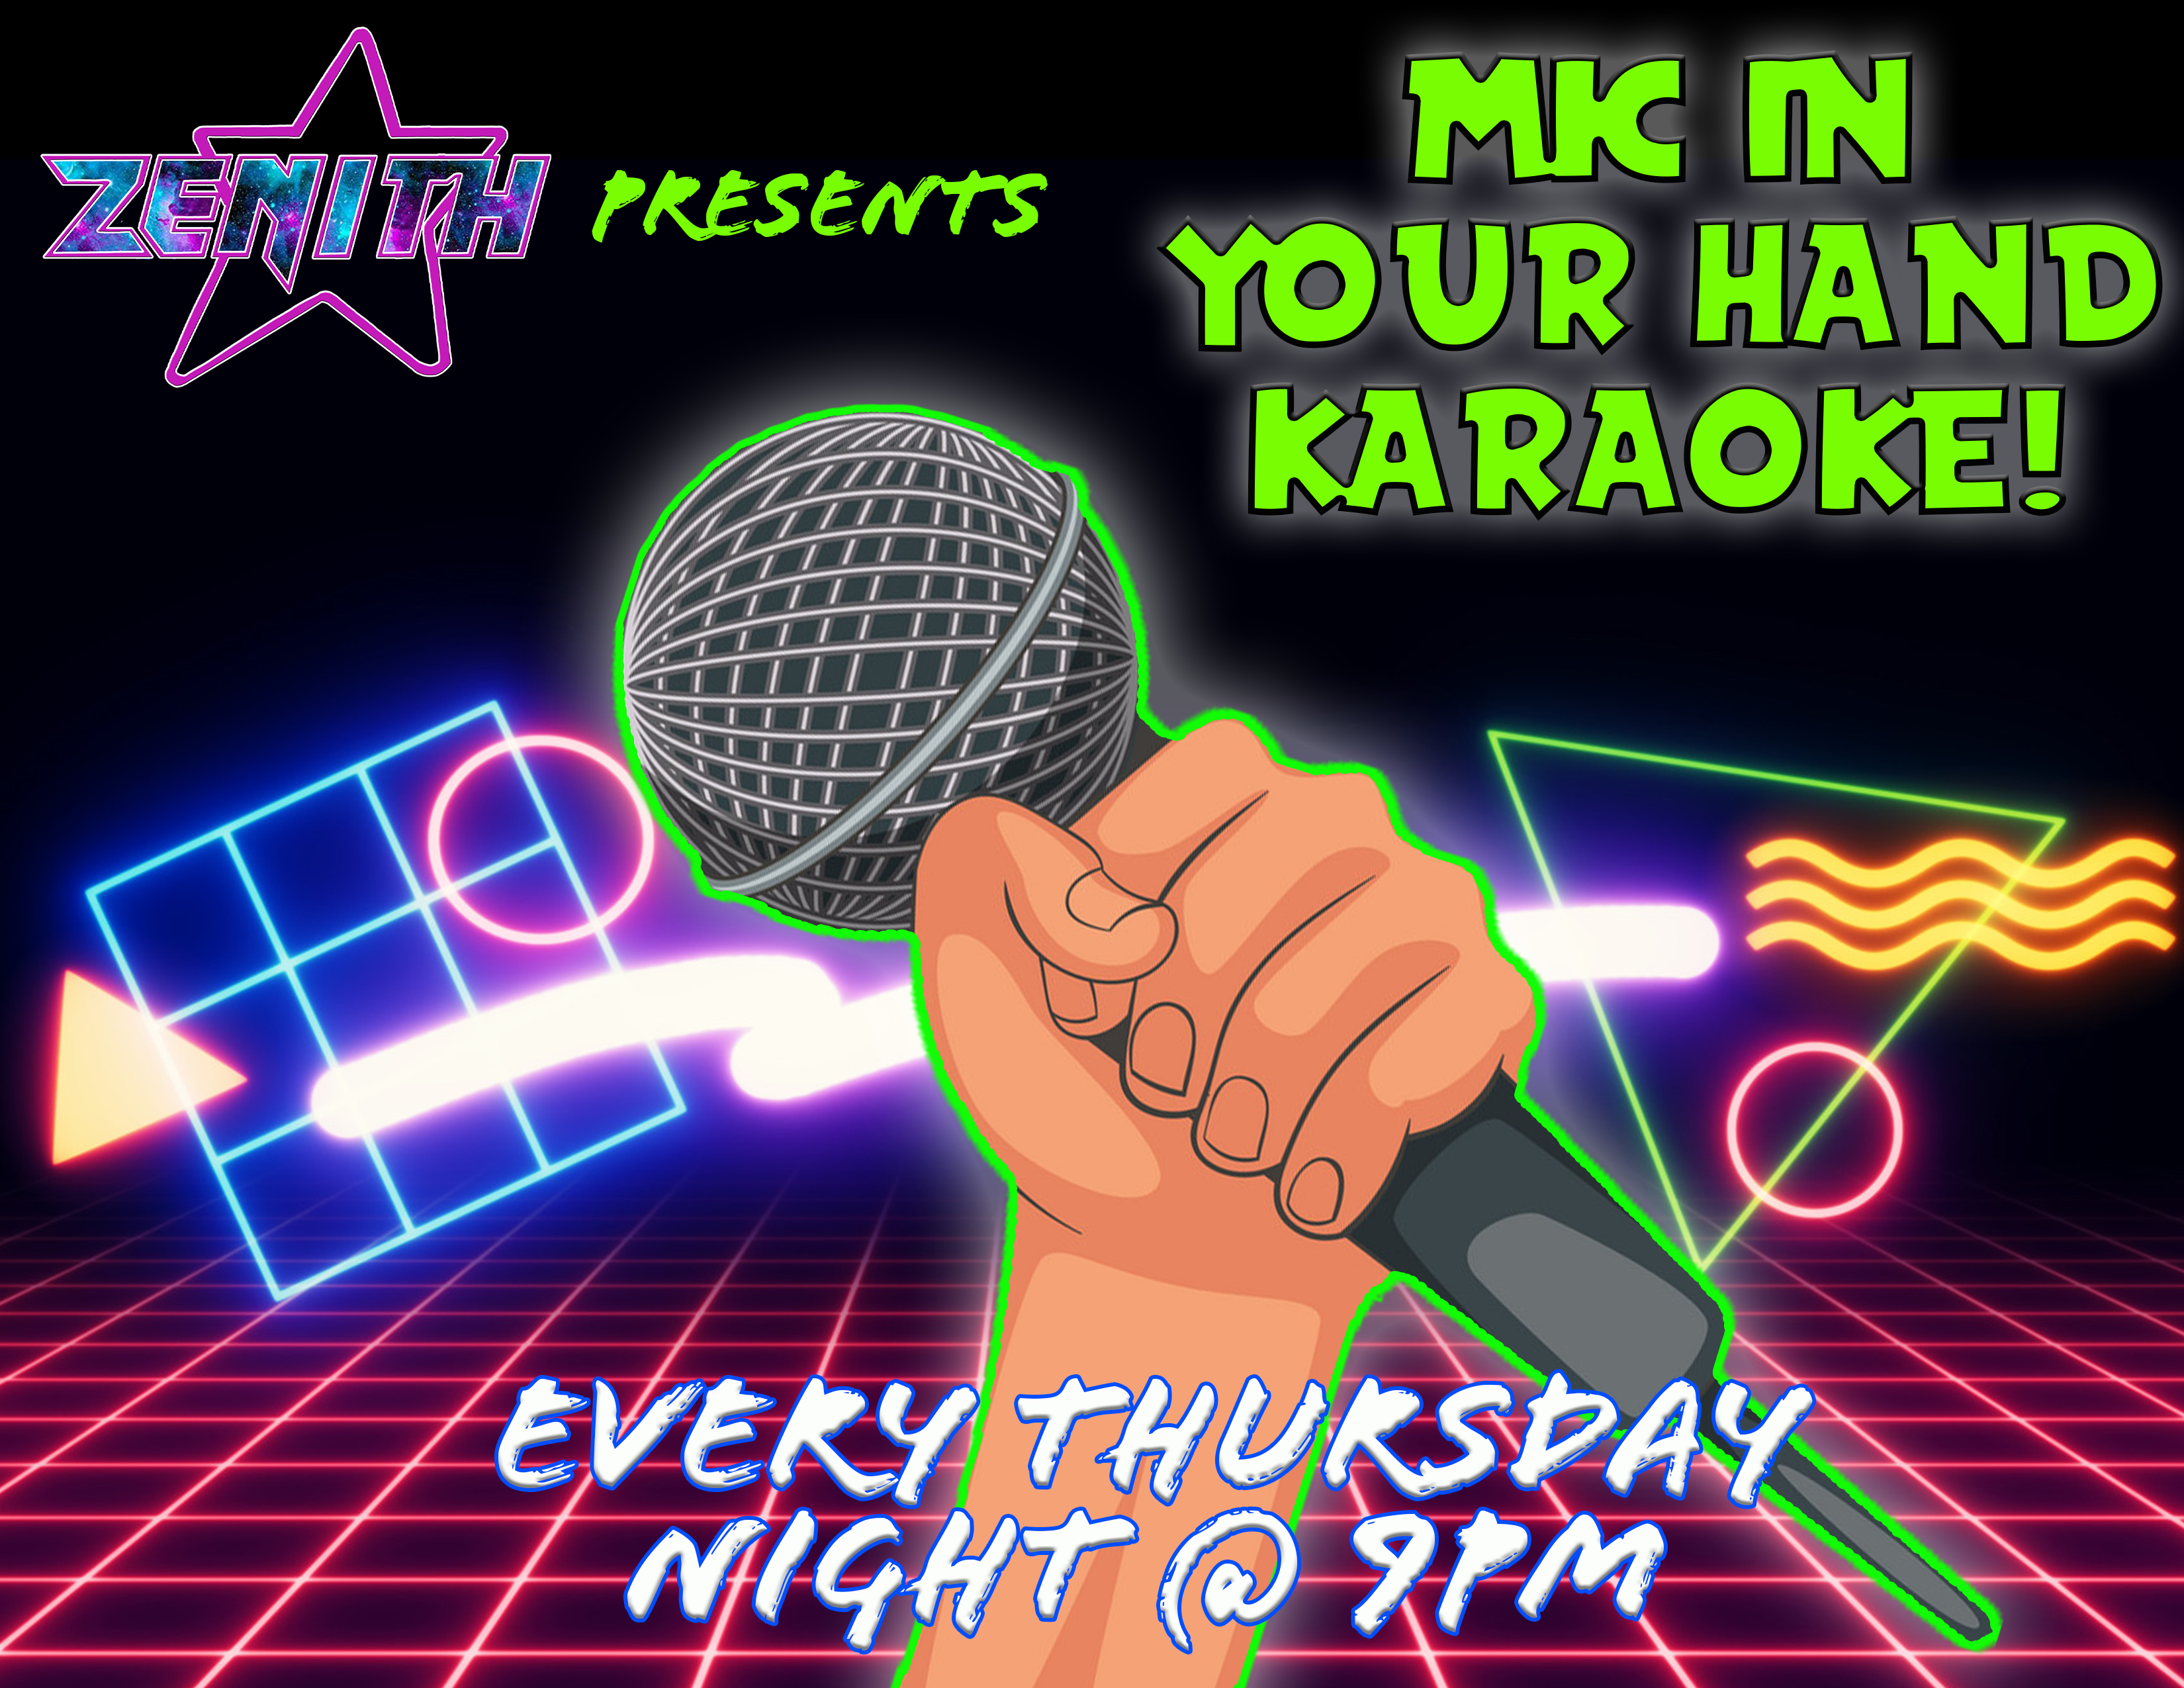 Visit us for karaoke every Wednesday night at 9pm